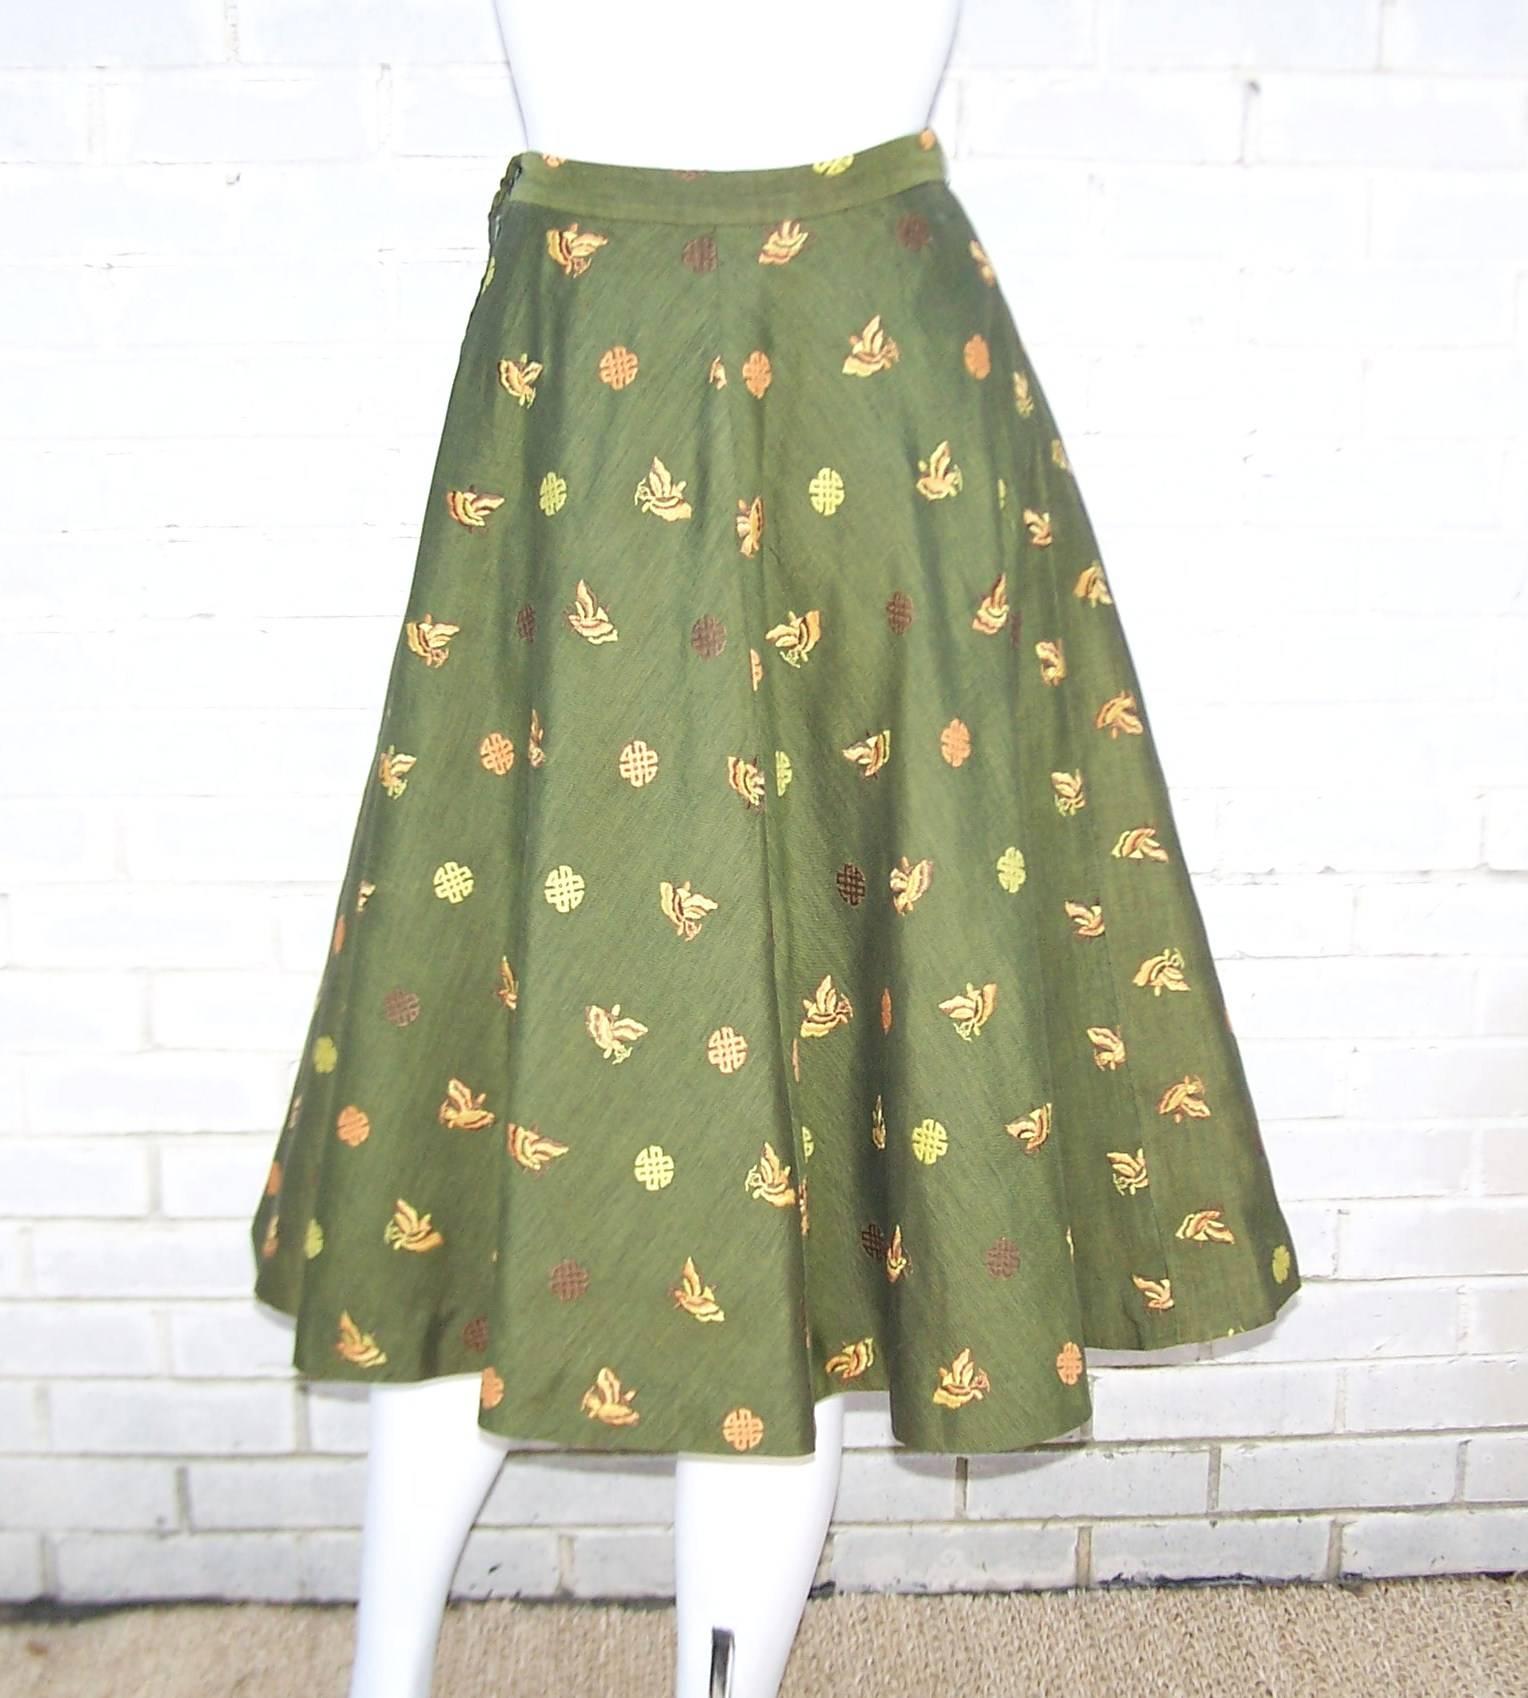 Women's 1950's Asian Inspired Full Circle Skirt With Embroidered Butterflies 